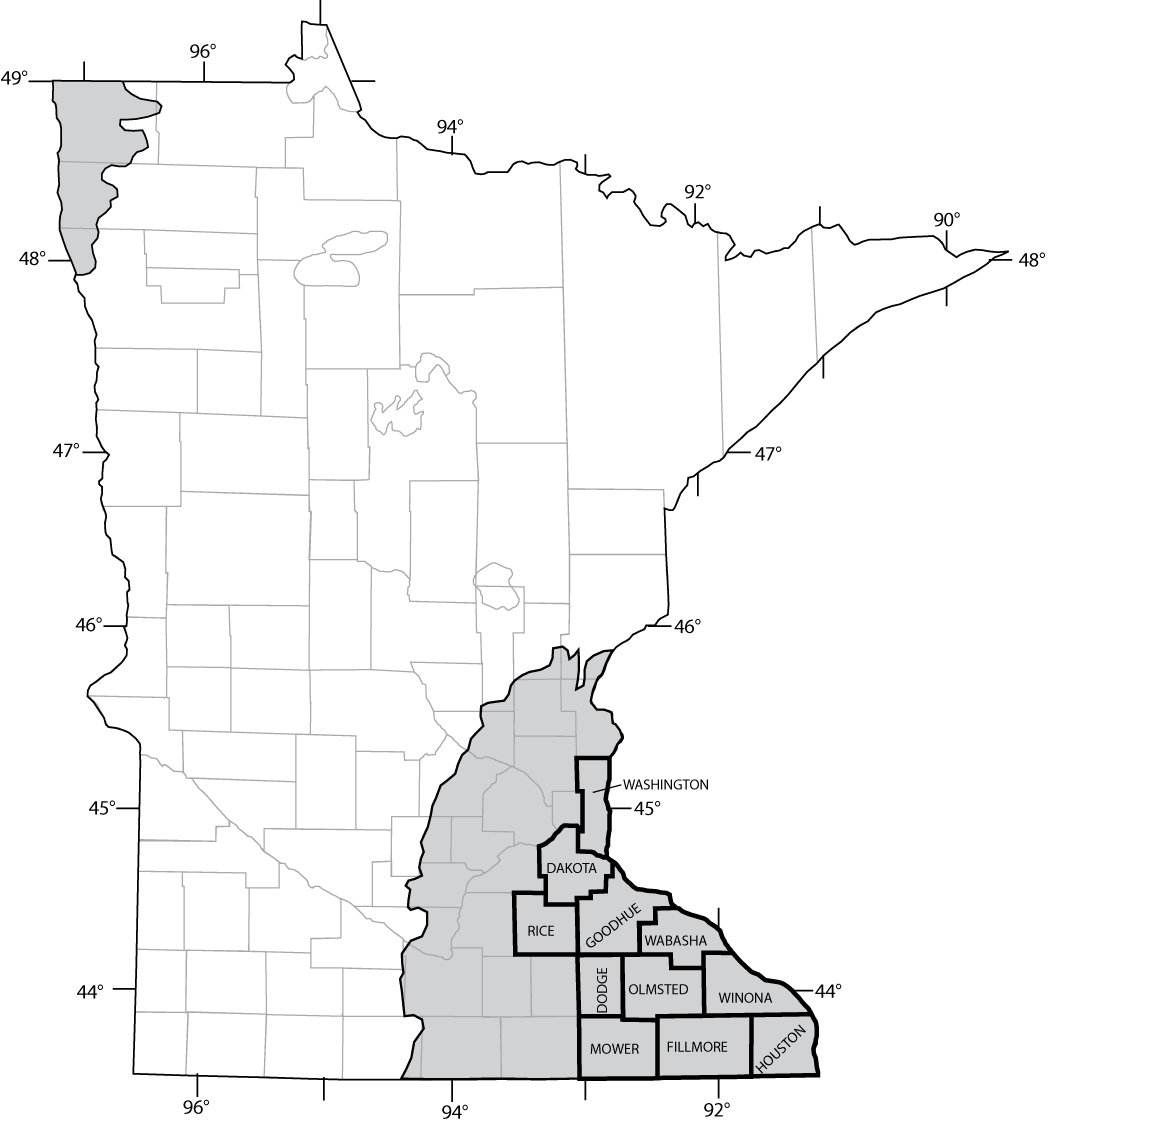 Extent of Paleozoic carbonate bedrock in Minnesota (shaded).